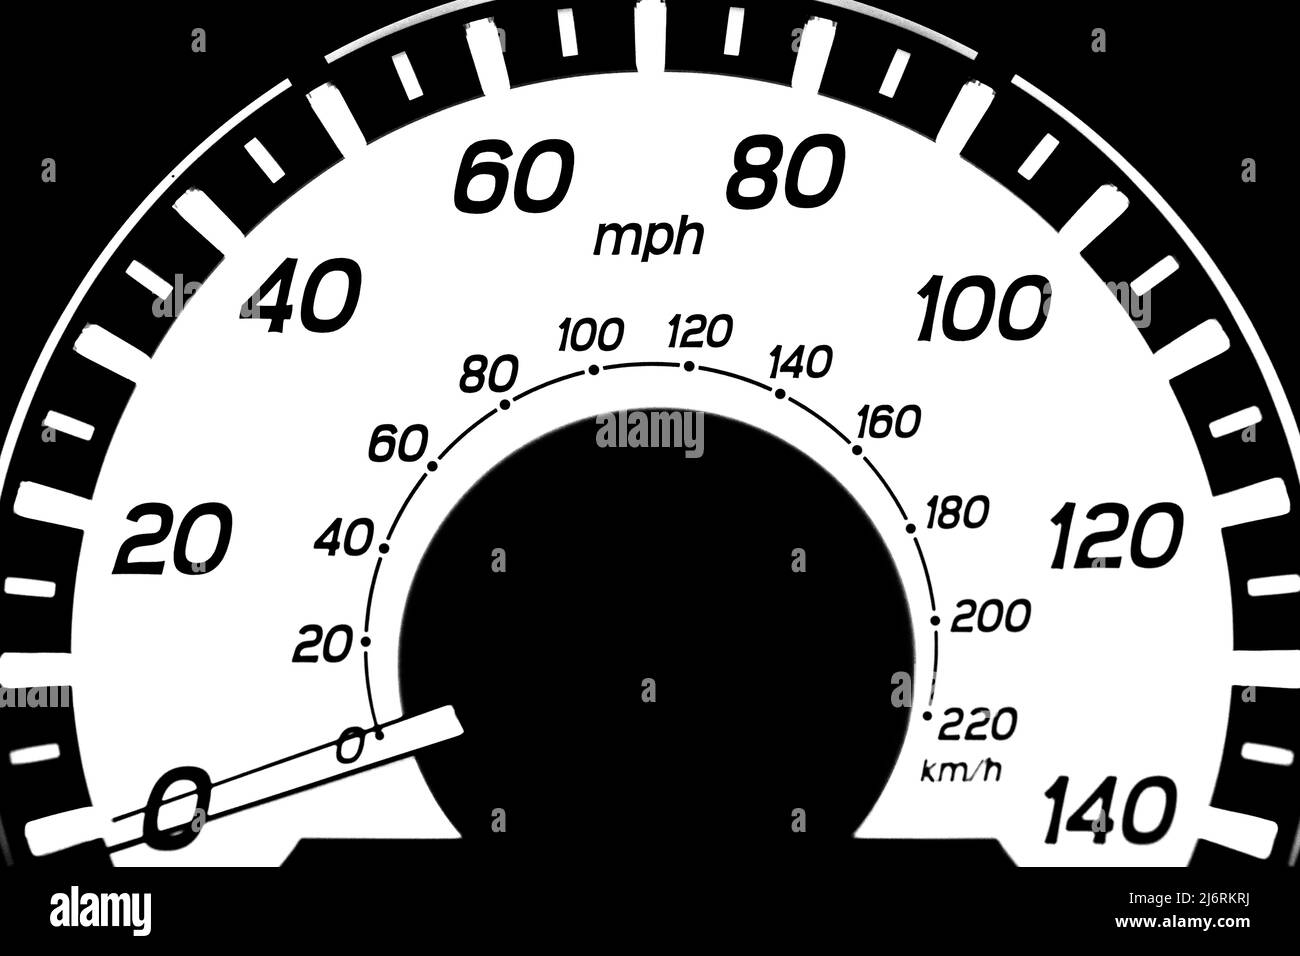 Car speed indicator show kilometer per hour in Metric unit and mile per hour in imperial Customary unit. Stock Photo